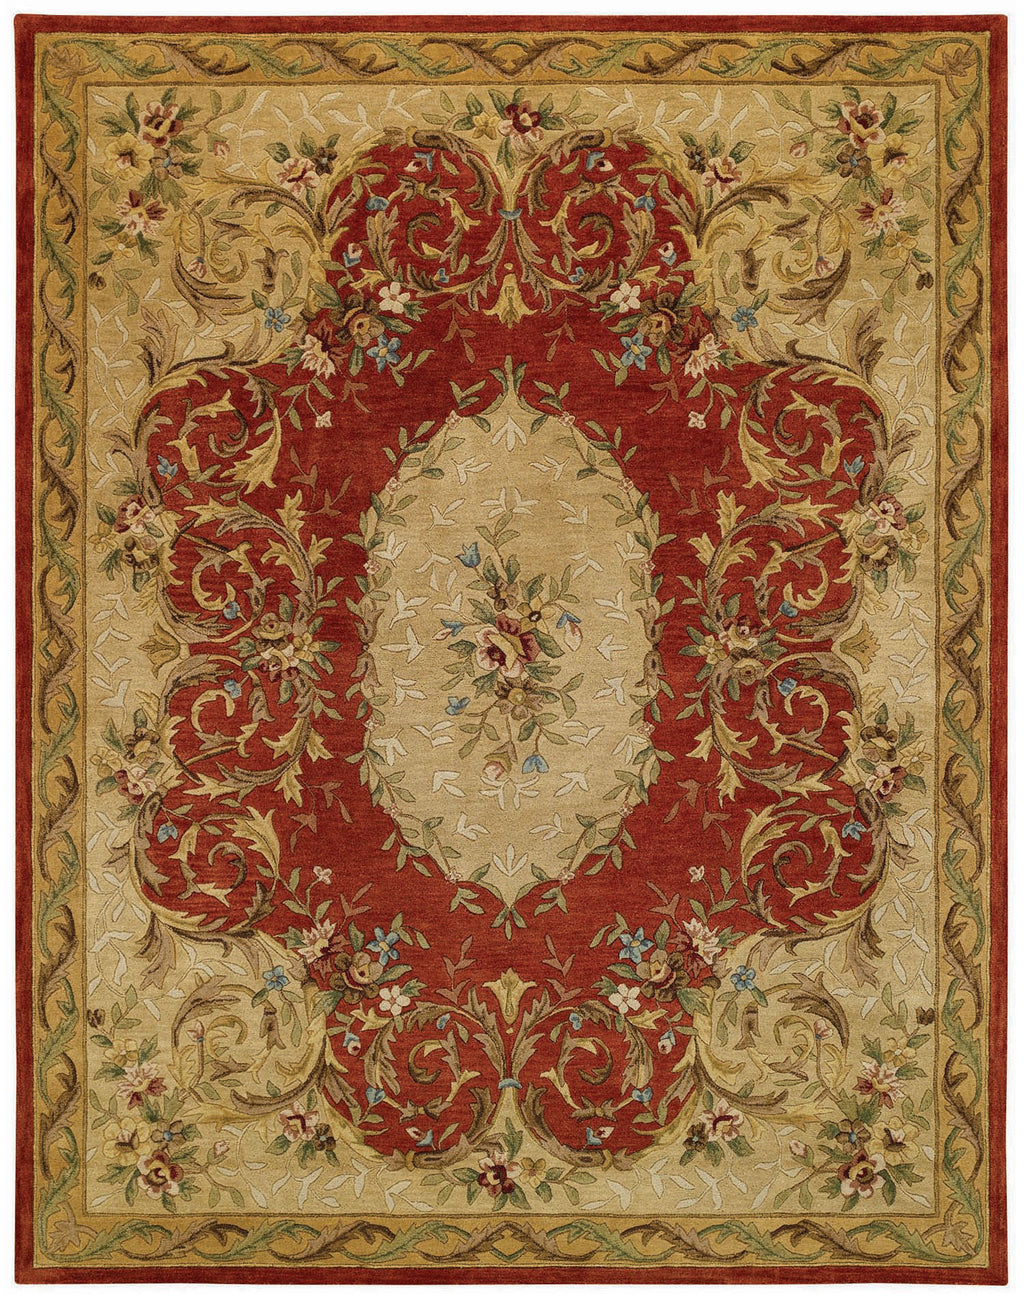 Capel Evelyn 3068 Coral Red 825 Area Rug main image